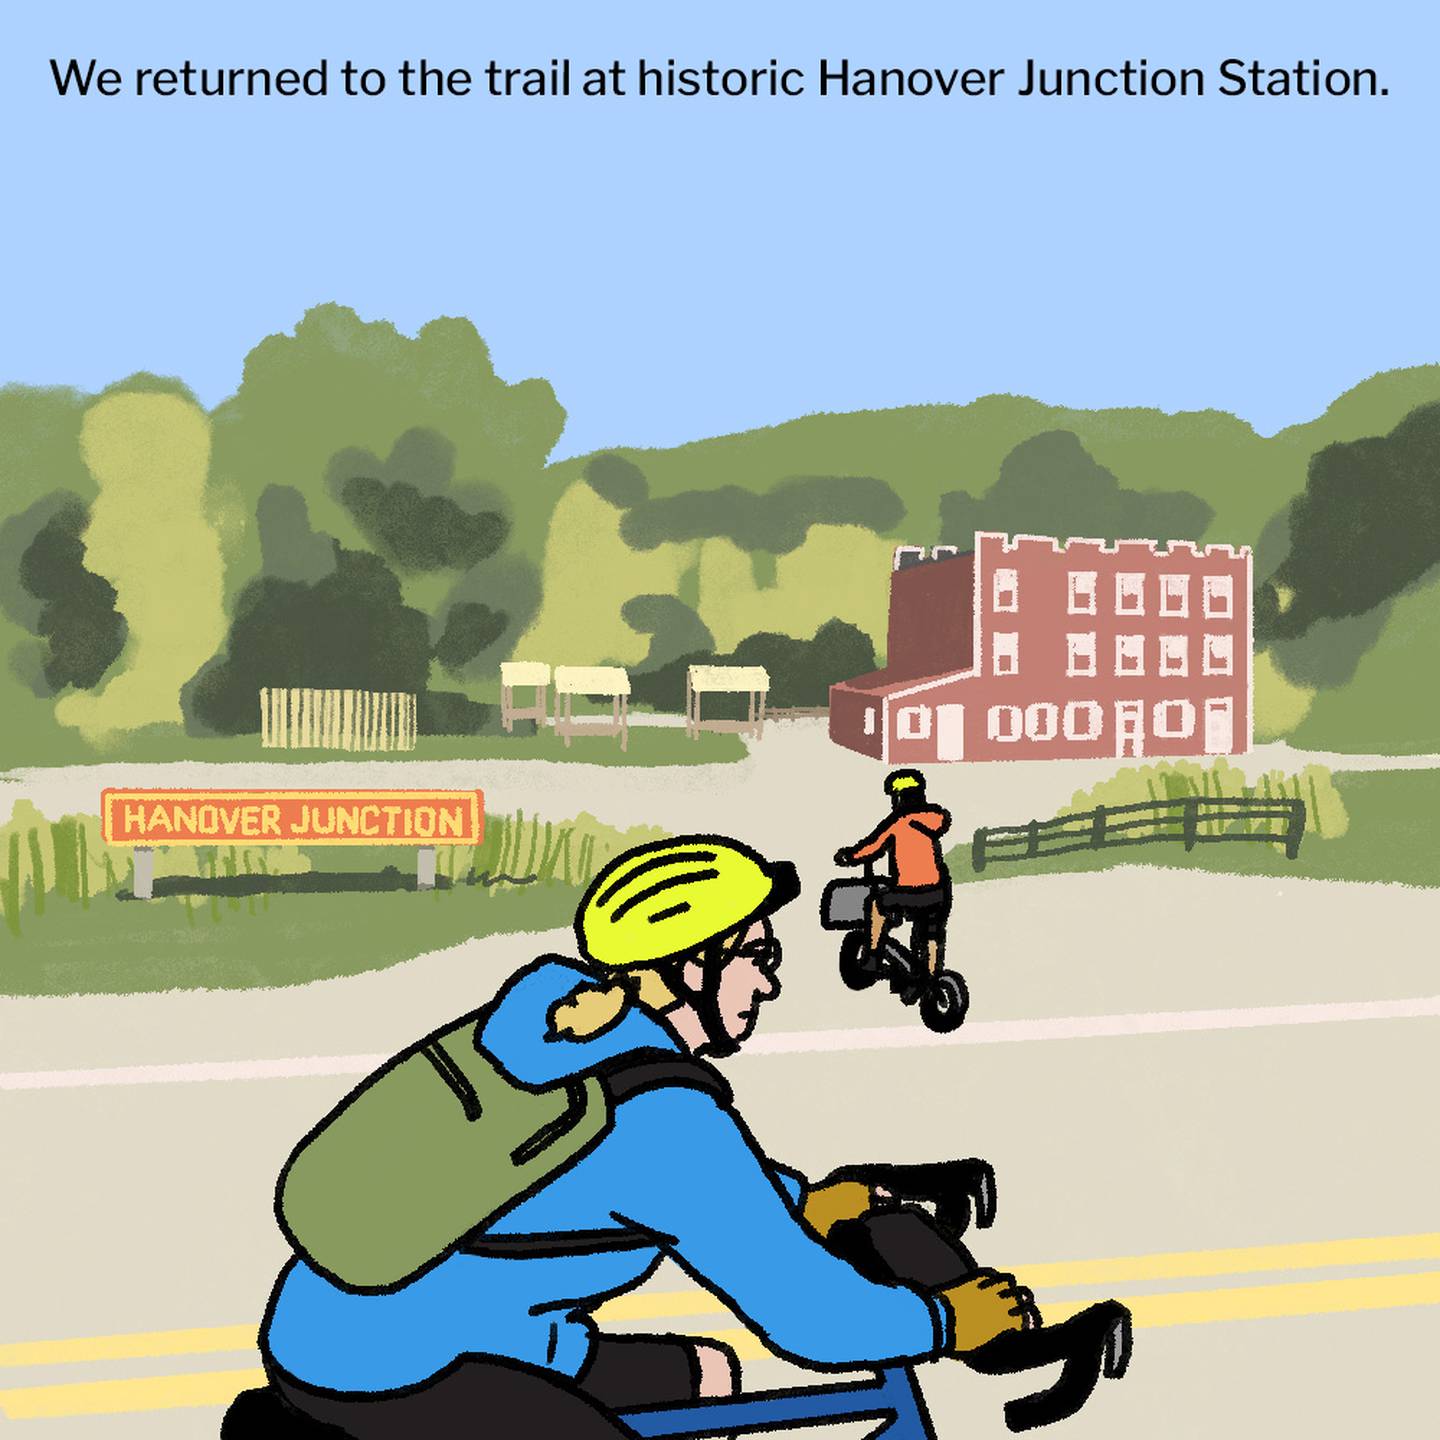 Illustration of two bicyclists on the road next to a historic red train station, with the trail in the background. A red sign next to the road in the middle ground says "Hanover Junction."